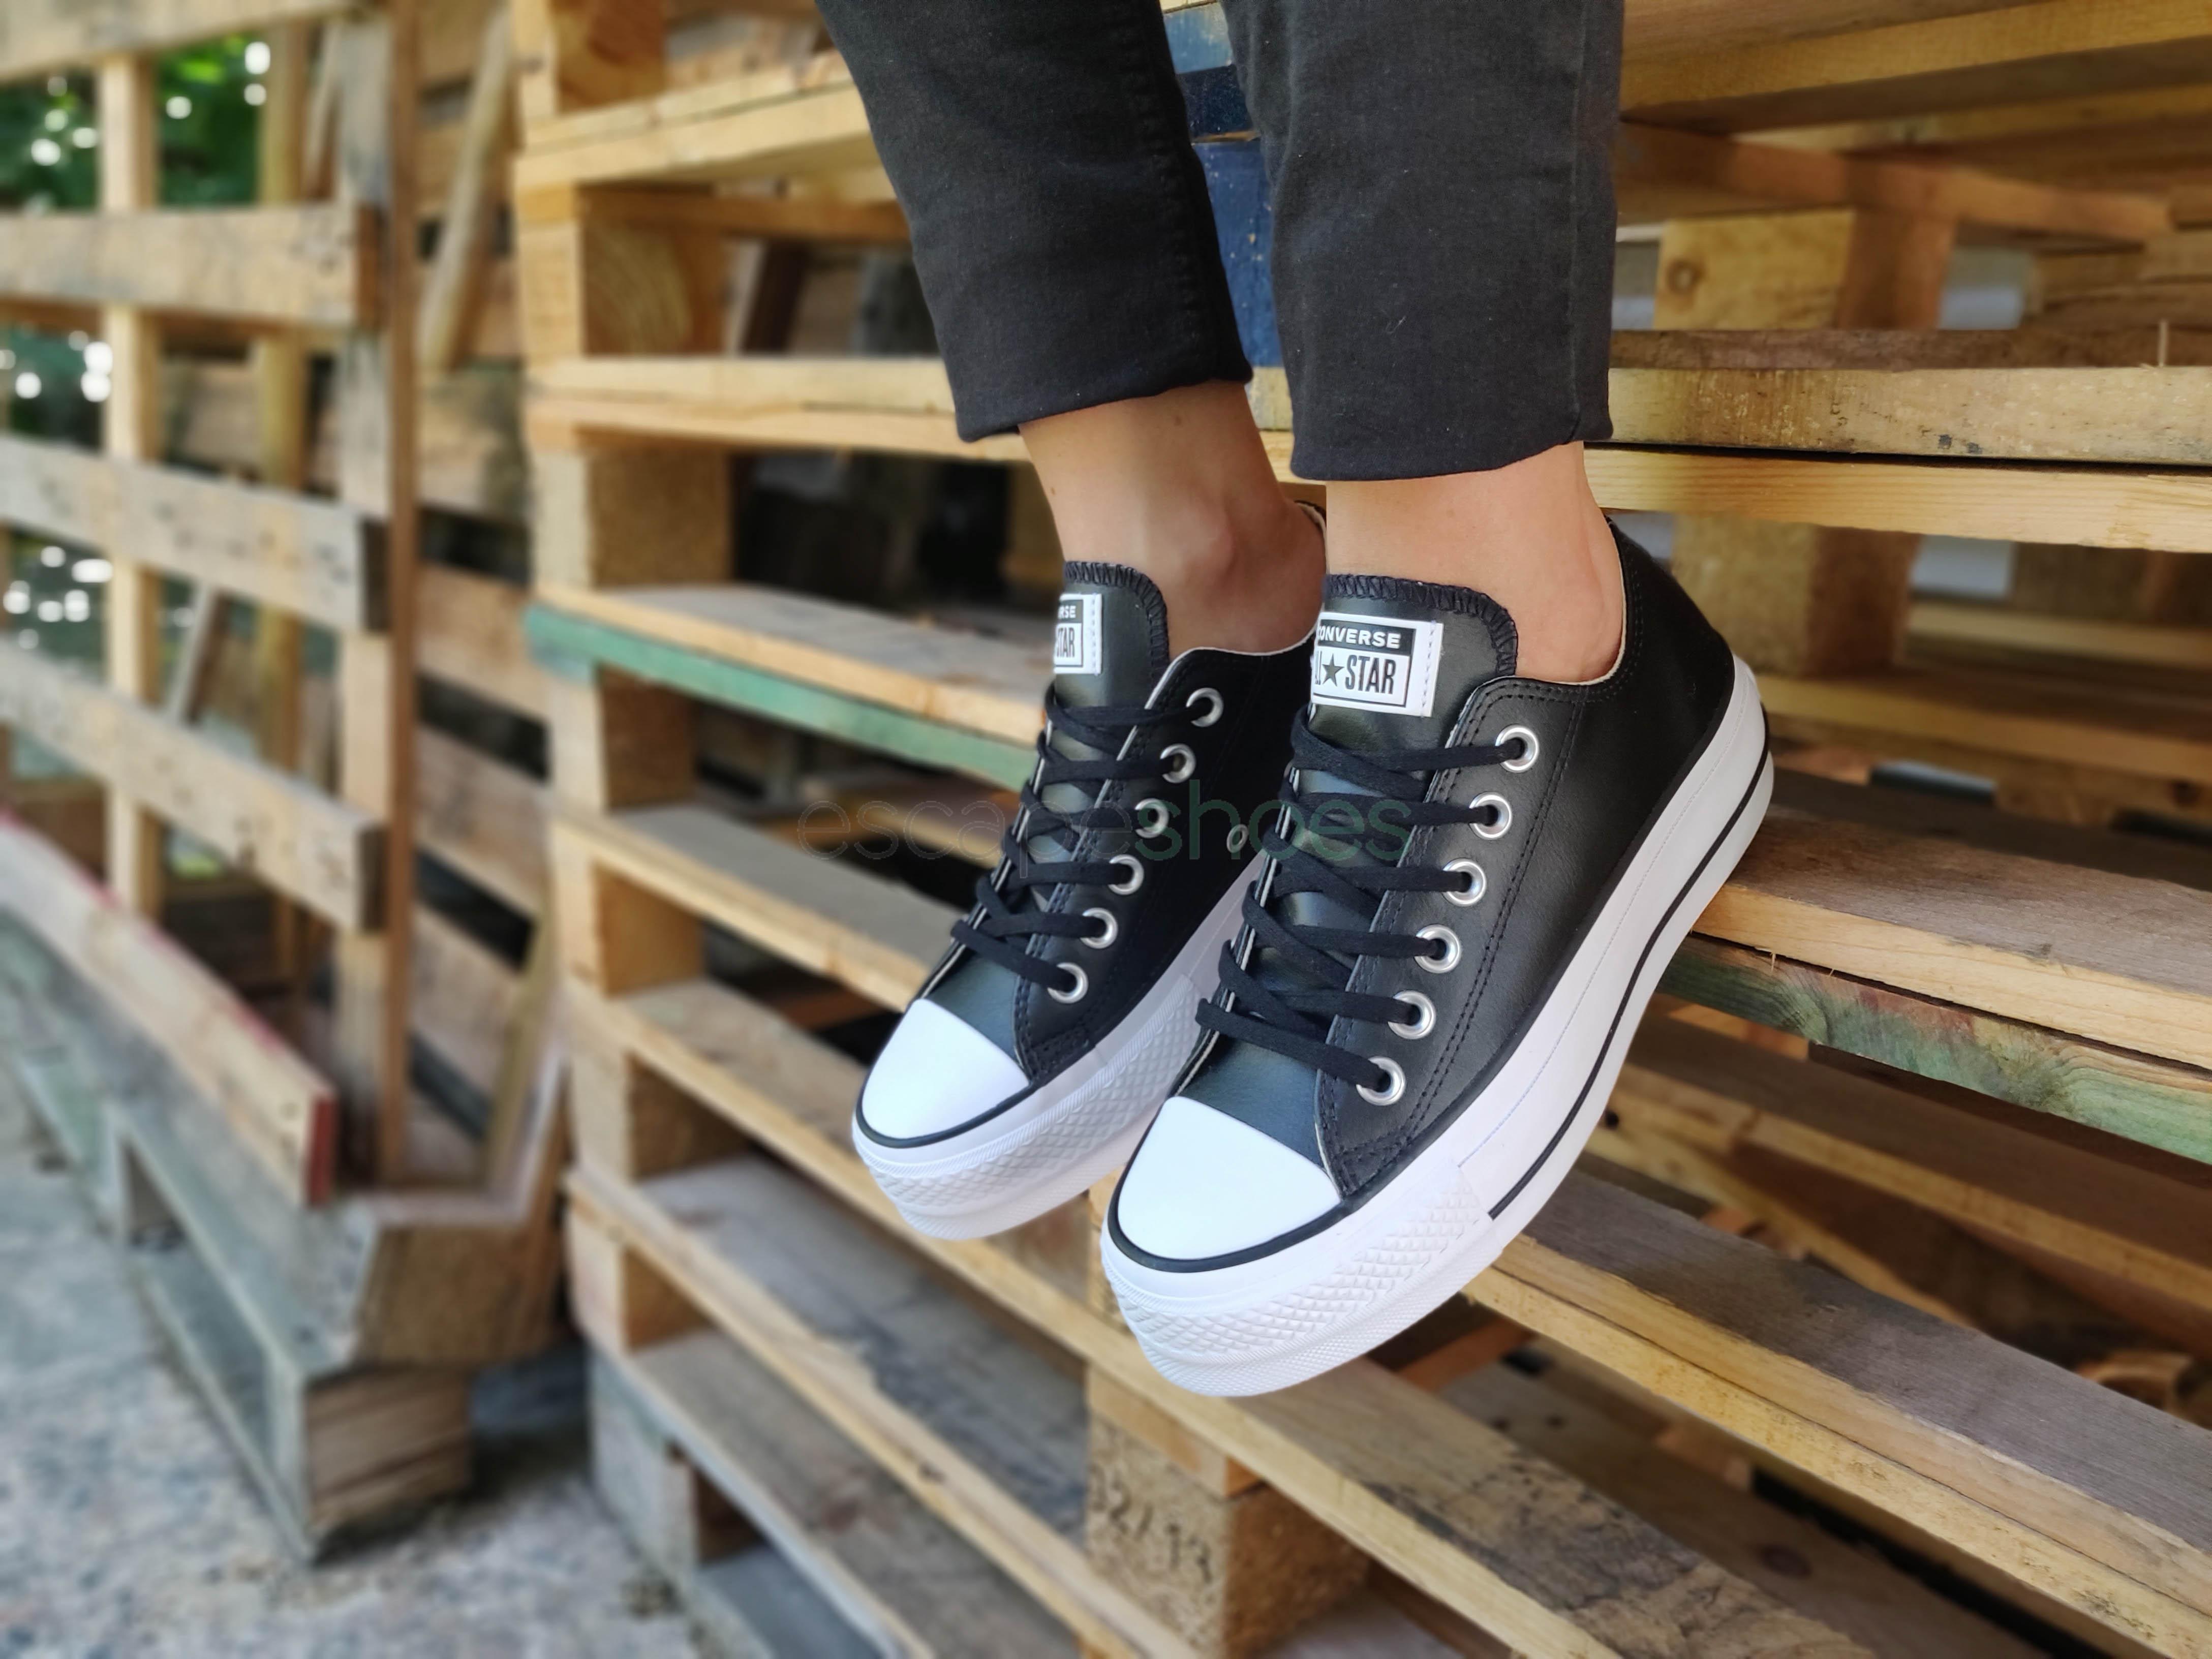 converse chuck taylor all star lift clean leather high top